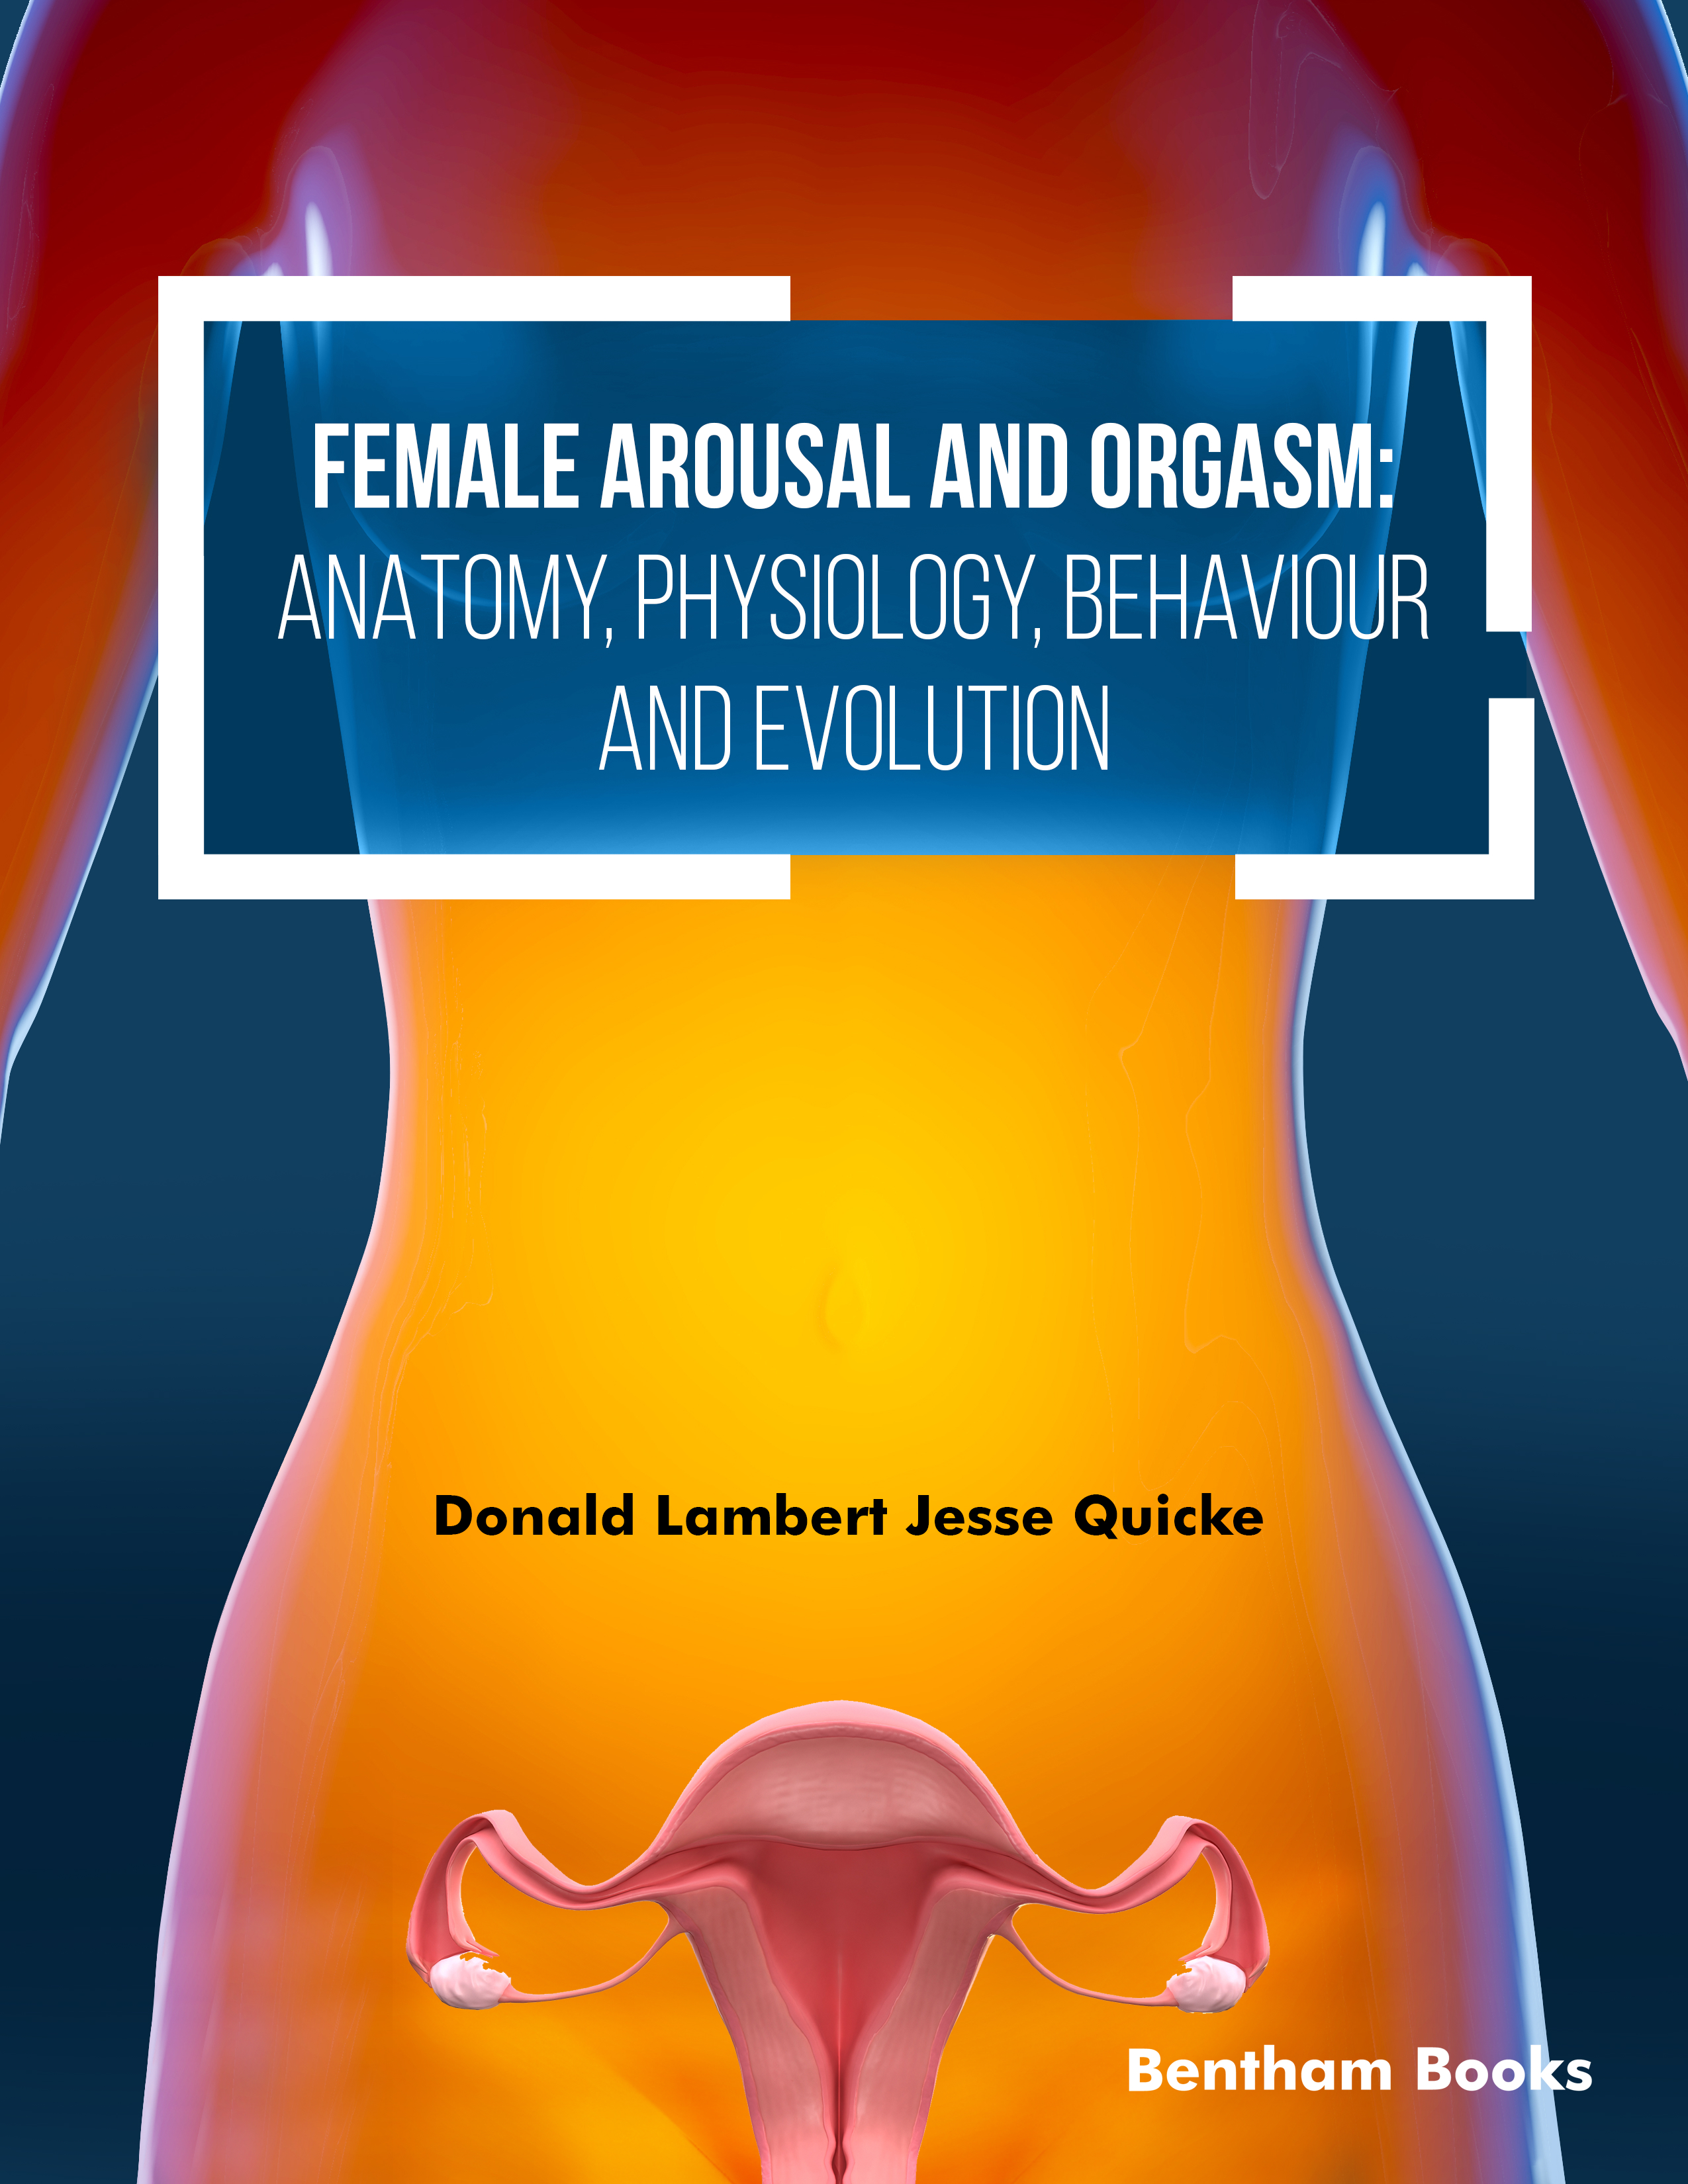 Female Arousal and Orgasm: Anatomy, Physiology, Behaviour and Evolution